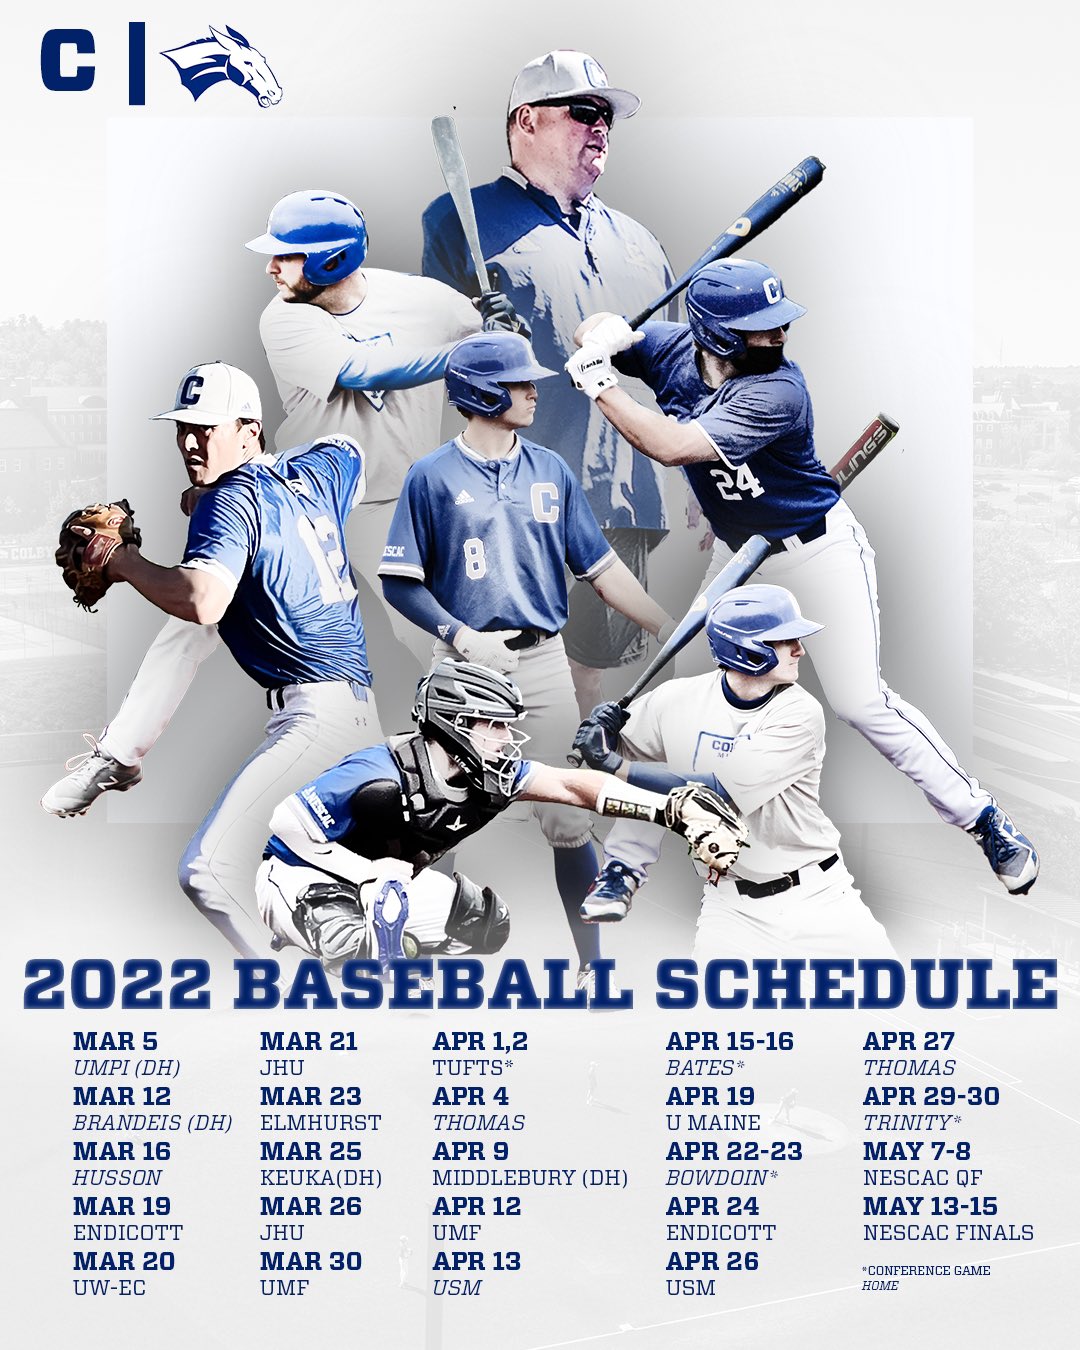 Jhu Finals Schedule Fall 2022 Colby Mules Baseball On Twitter: "The Countdown Is Officially On - The 2022  Season Starts Next Week. Let's Go, Mules. #Gomules Https://T.co/1Qr8Xwfjfi"  / Twitter